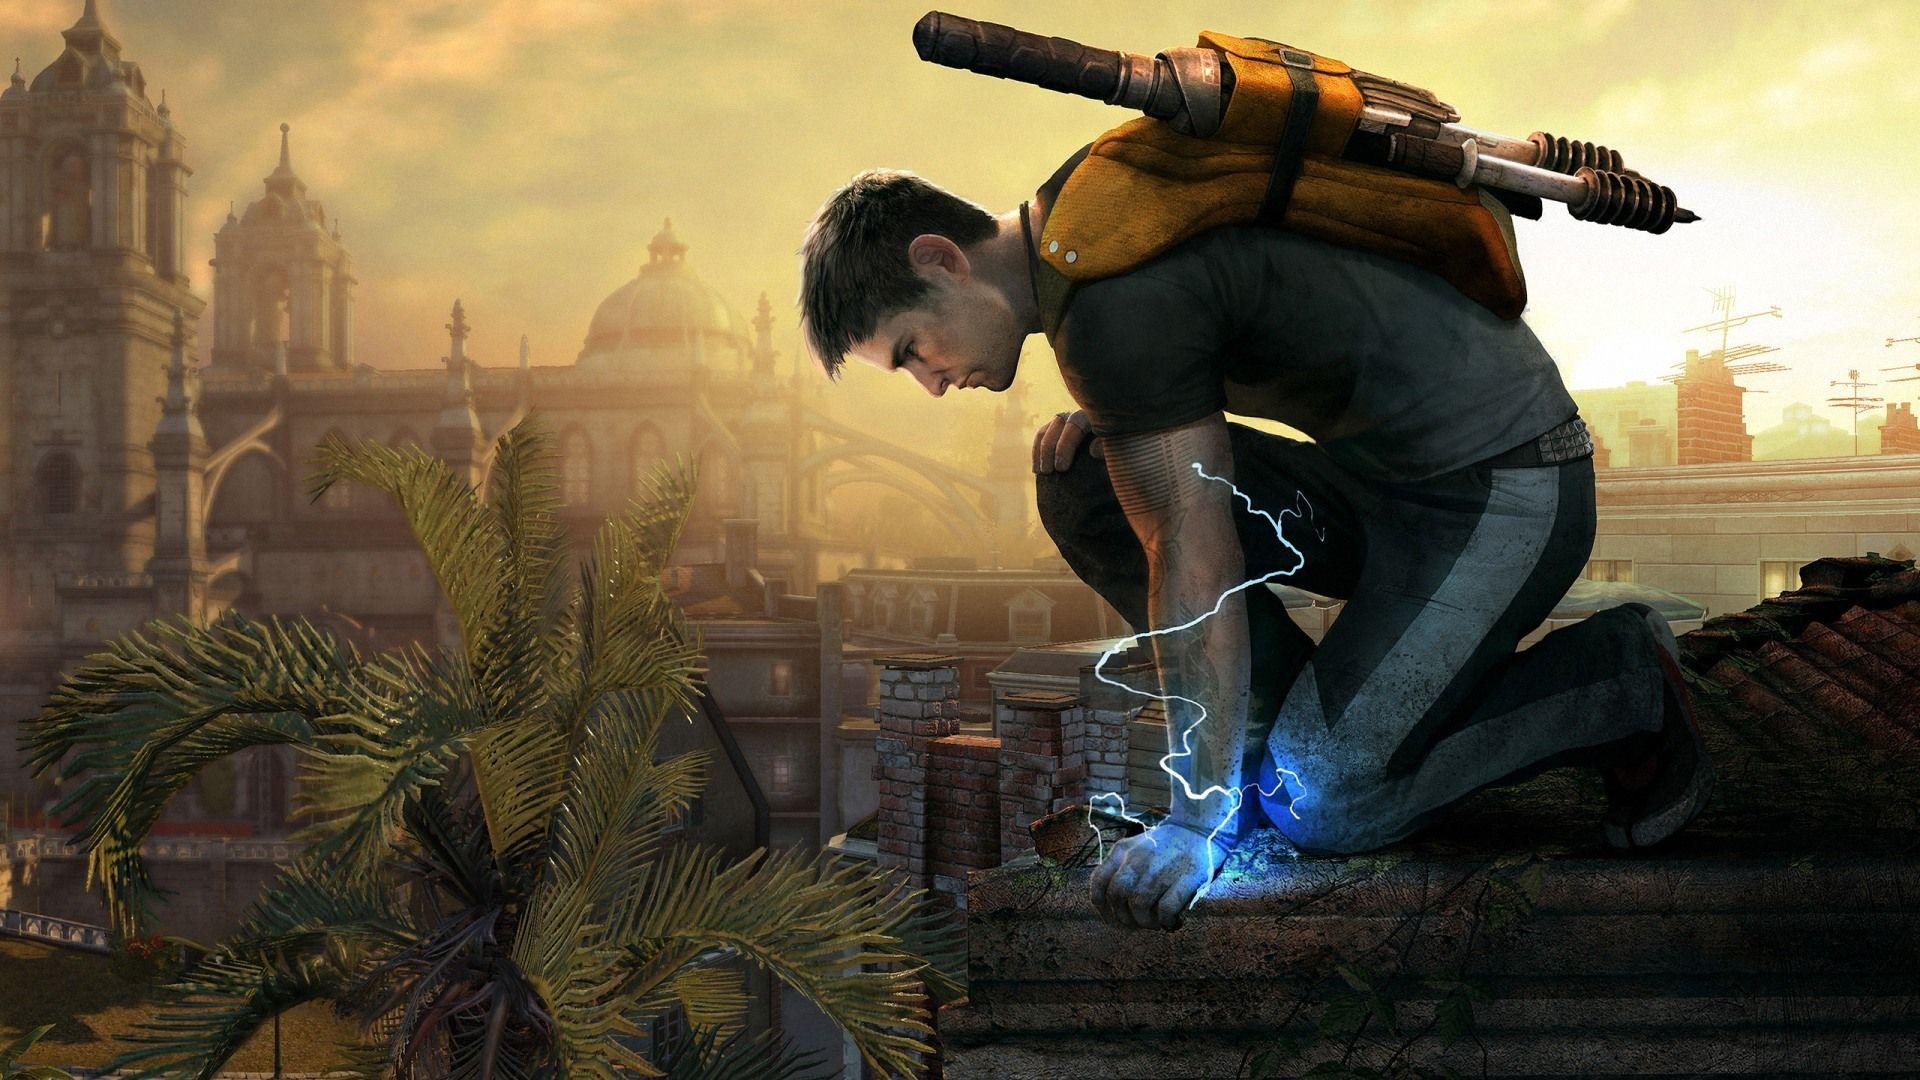 Free Infamous 2 Wallpaper